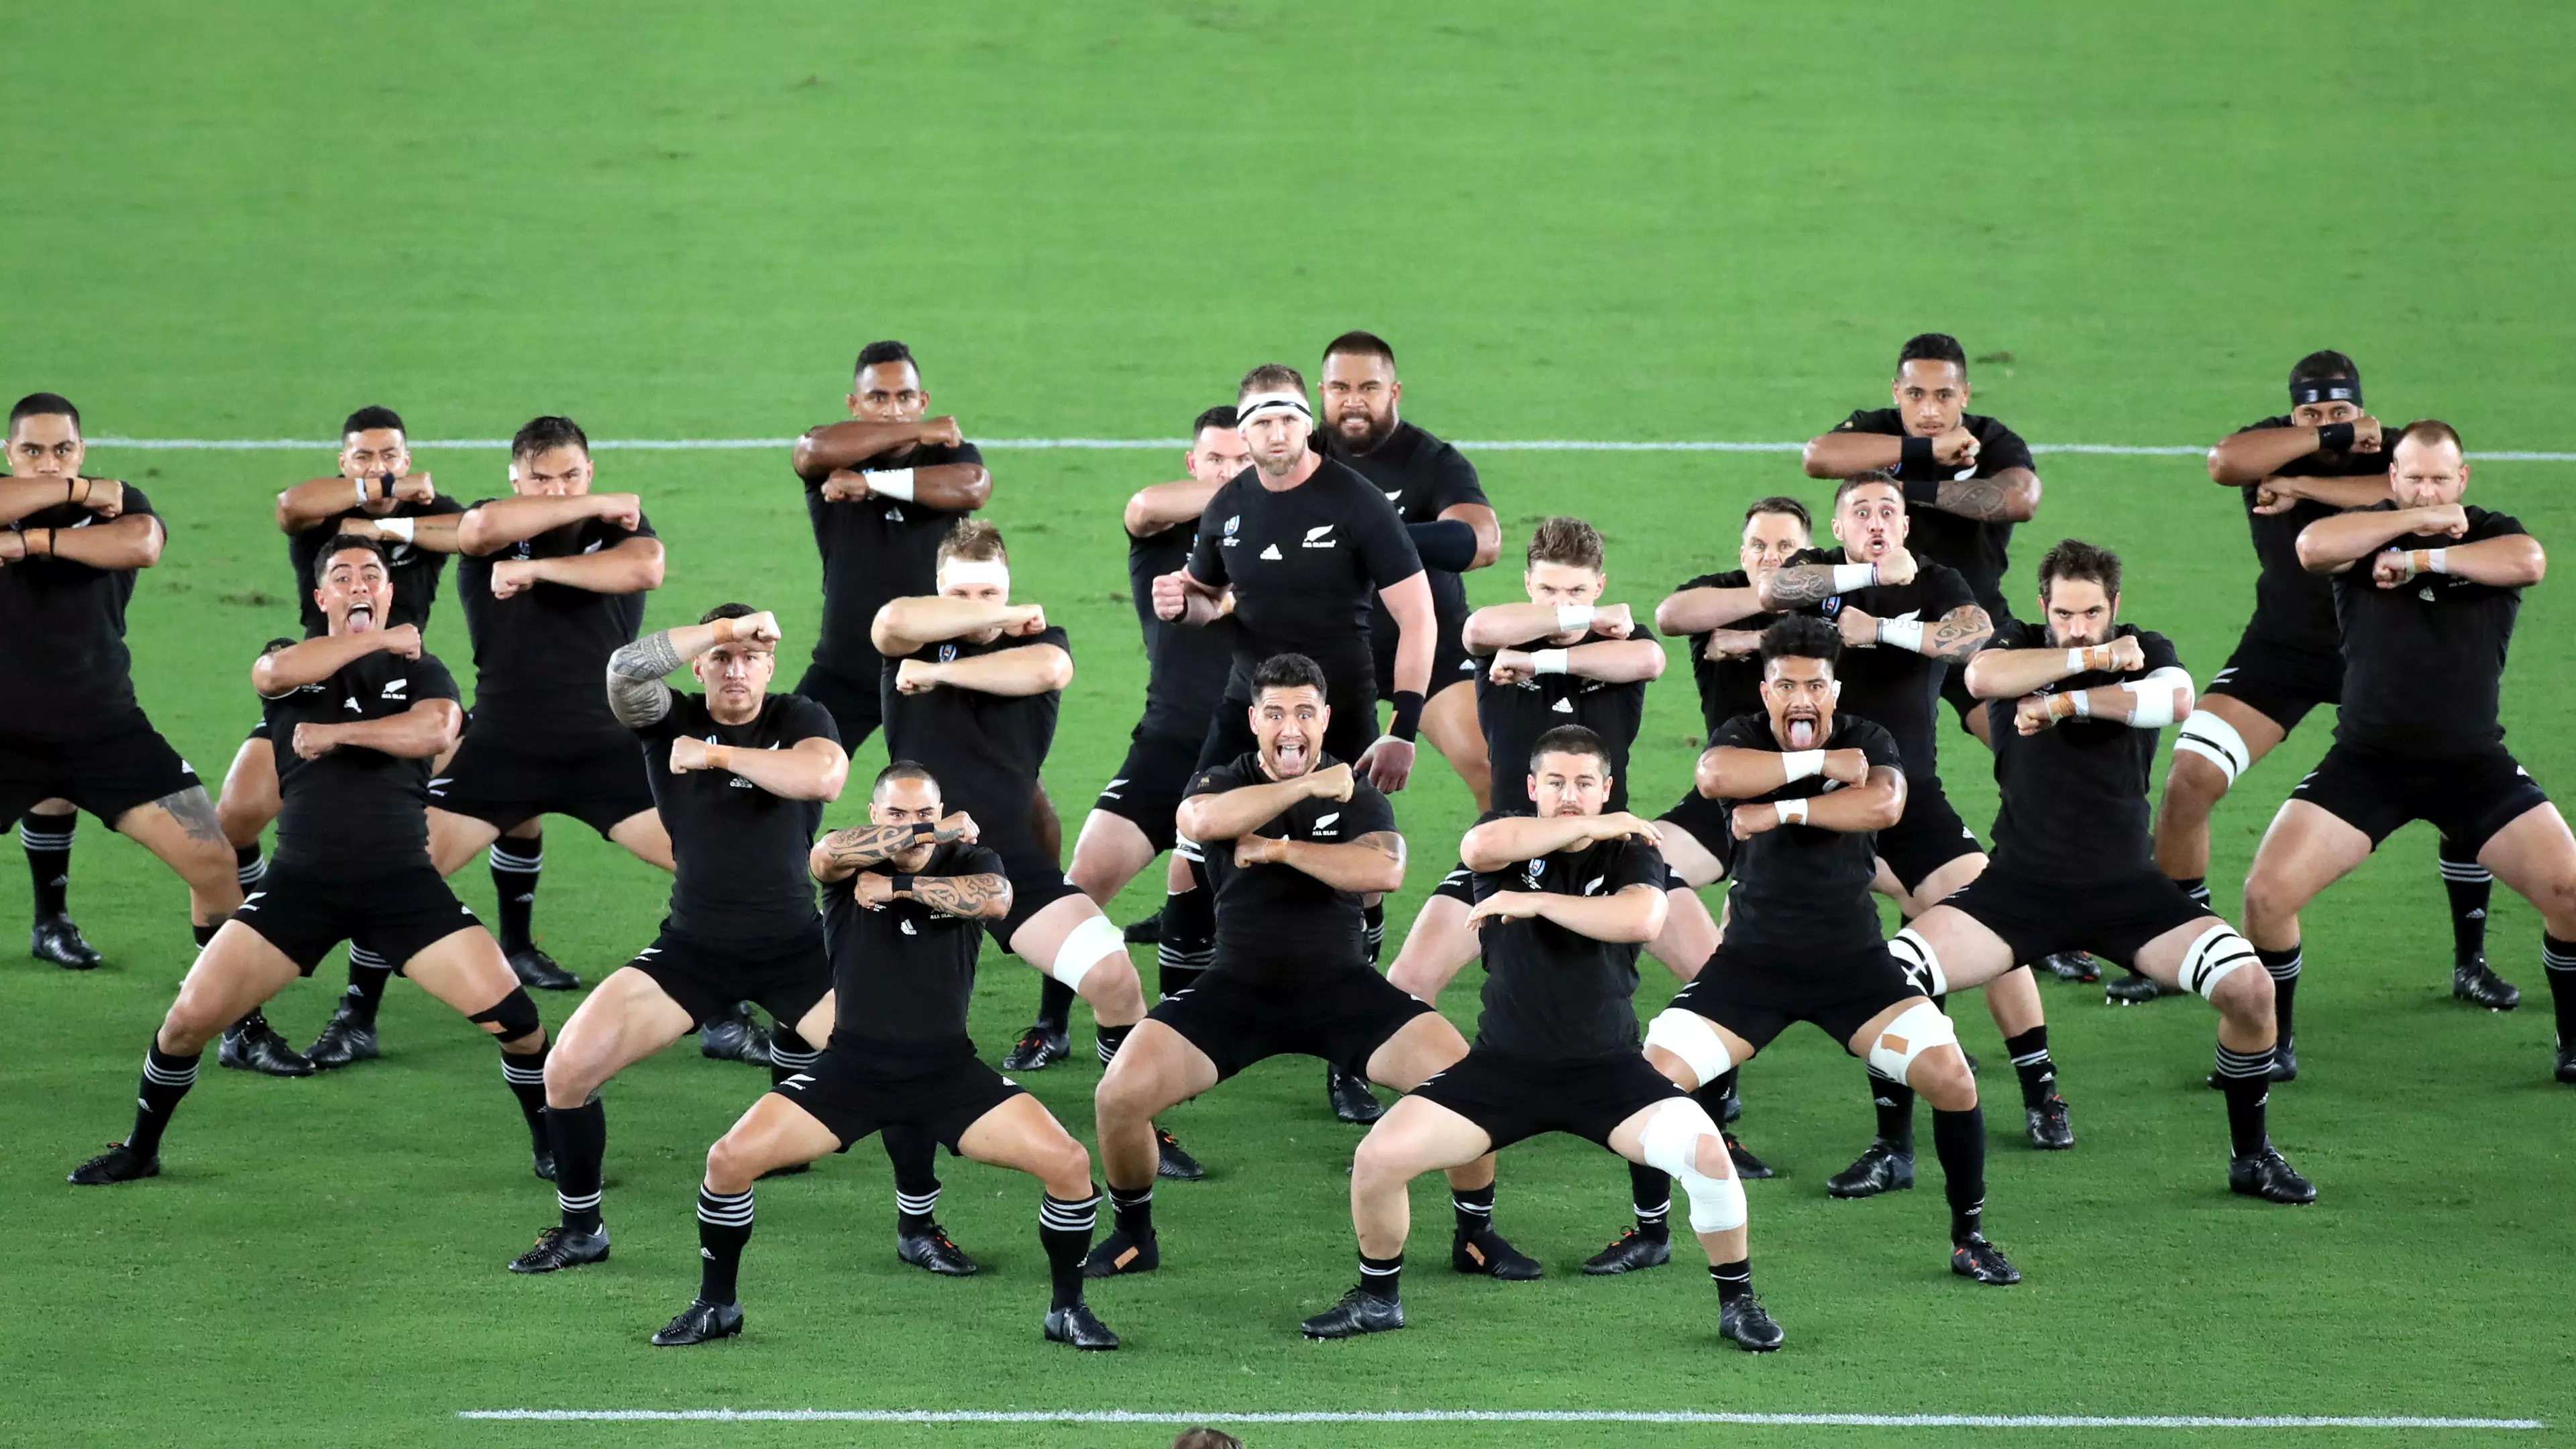 Irish Rugby Commentator Calls For 'Overdone' Haka To Be Banned Because It Gives All Blacks An Unfair Advantage